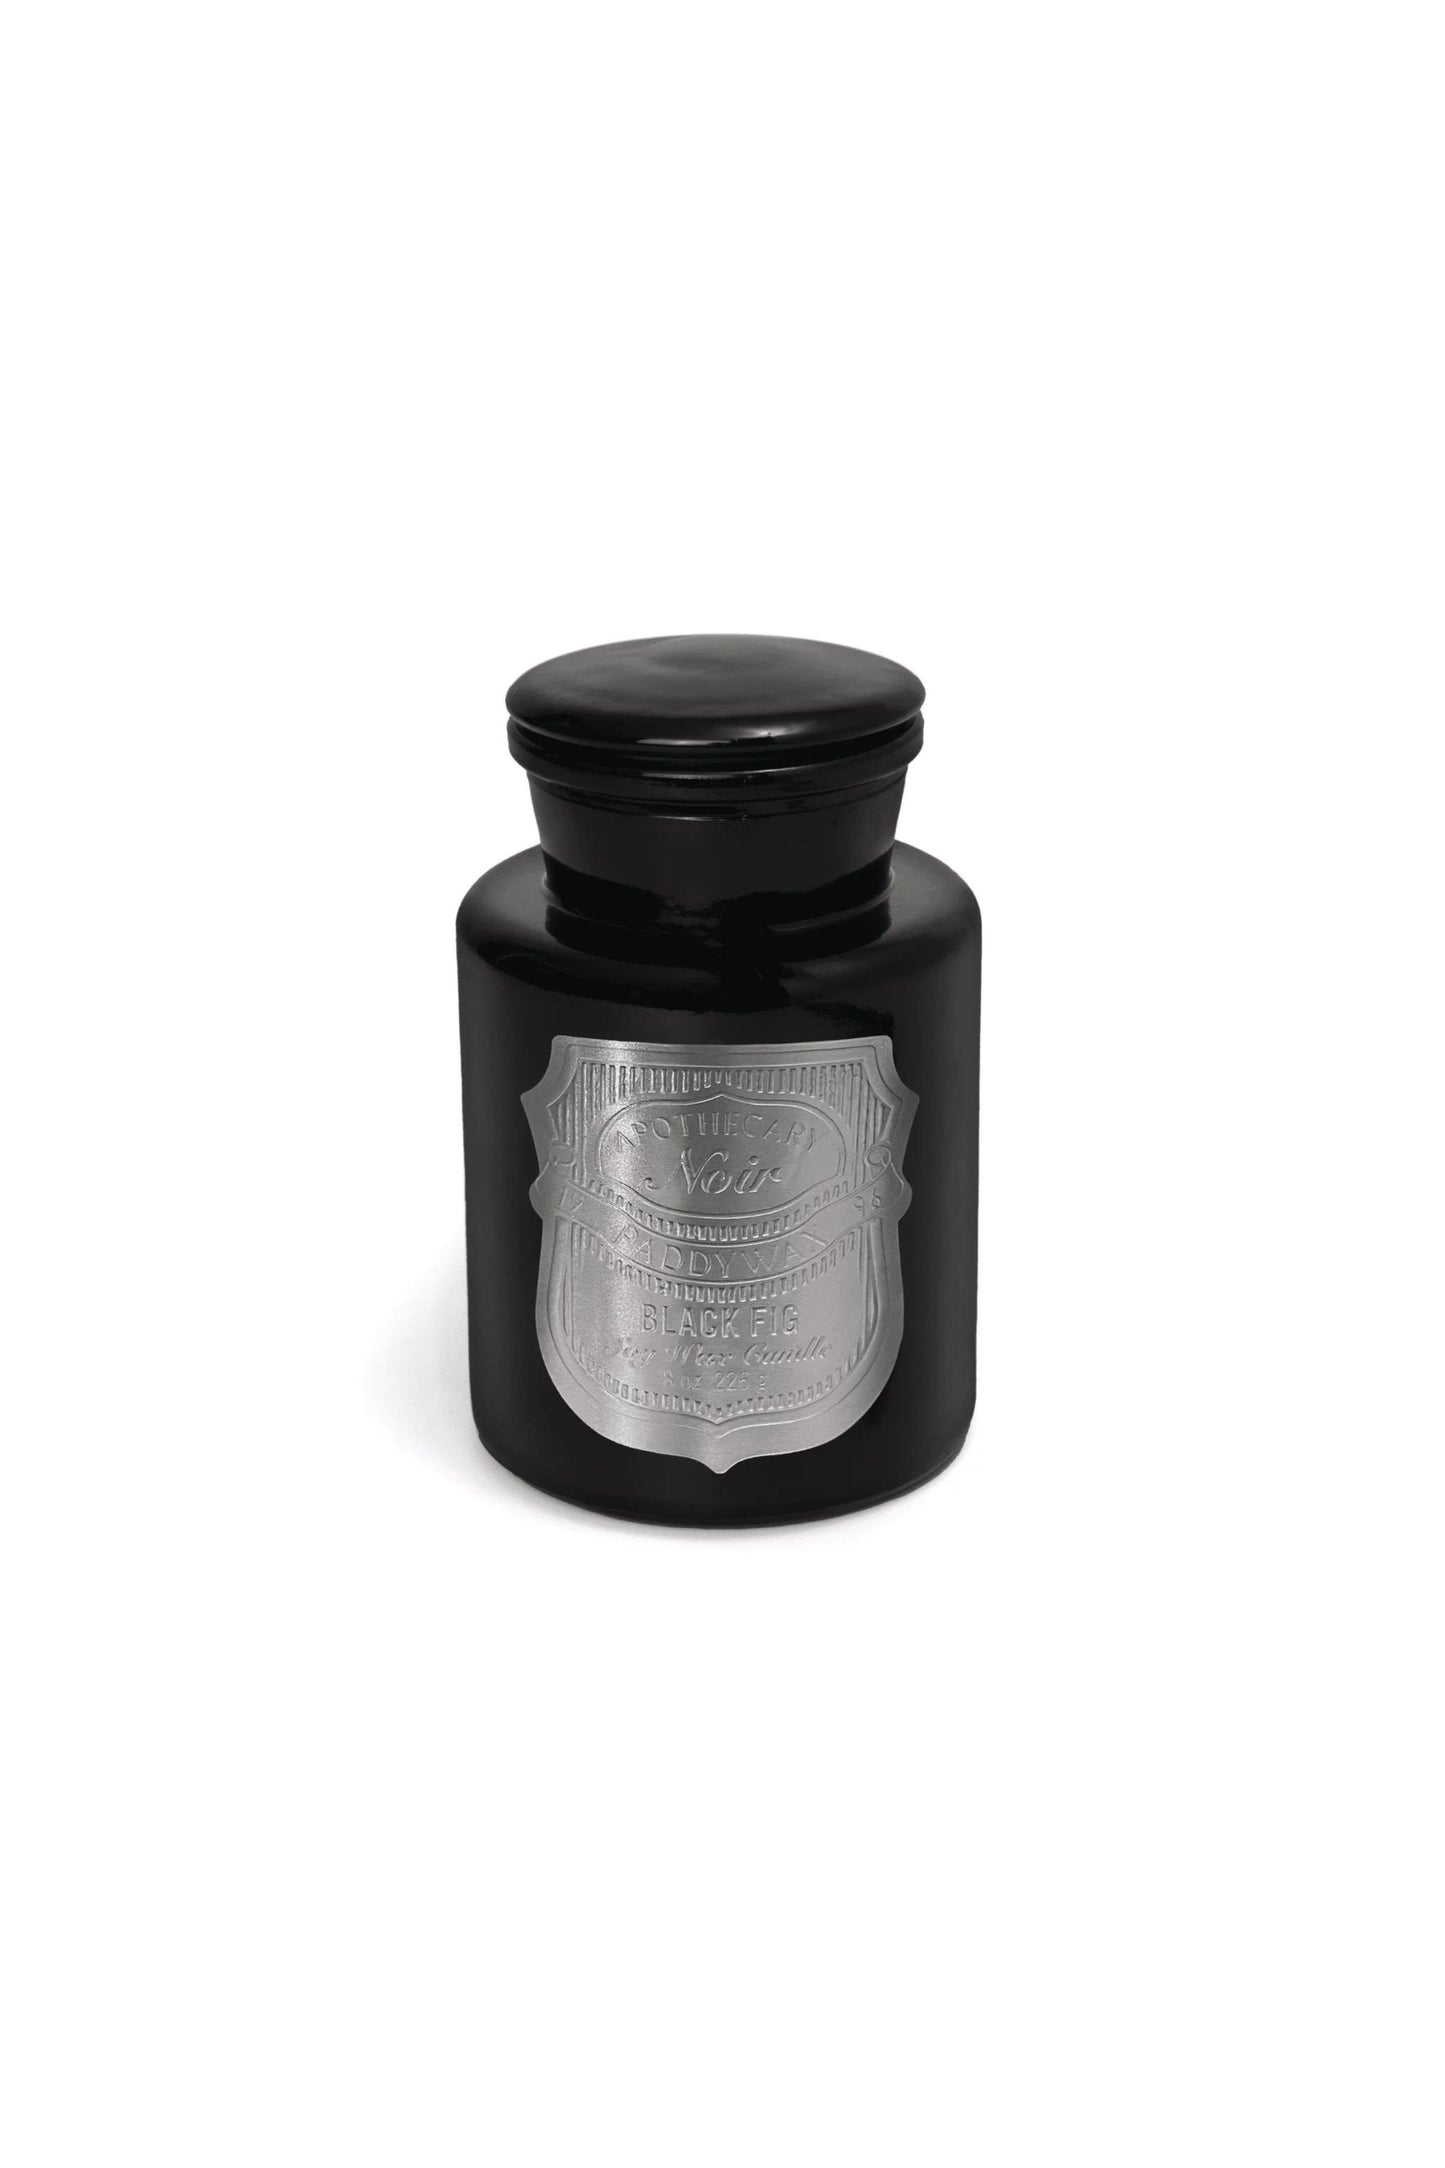 Apothecary Noir Candle / Black Fig